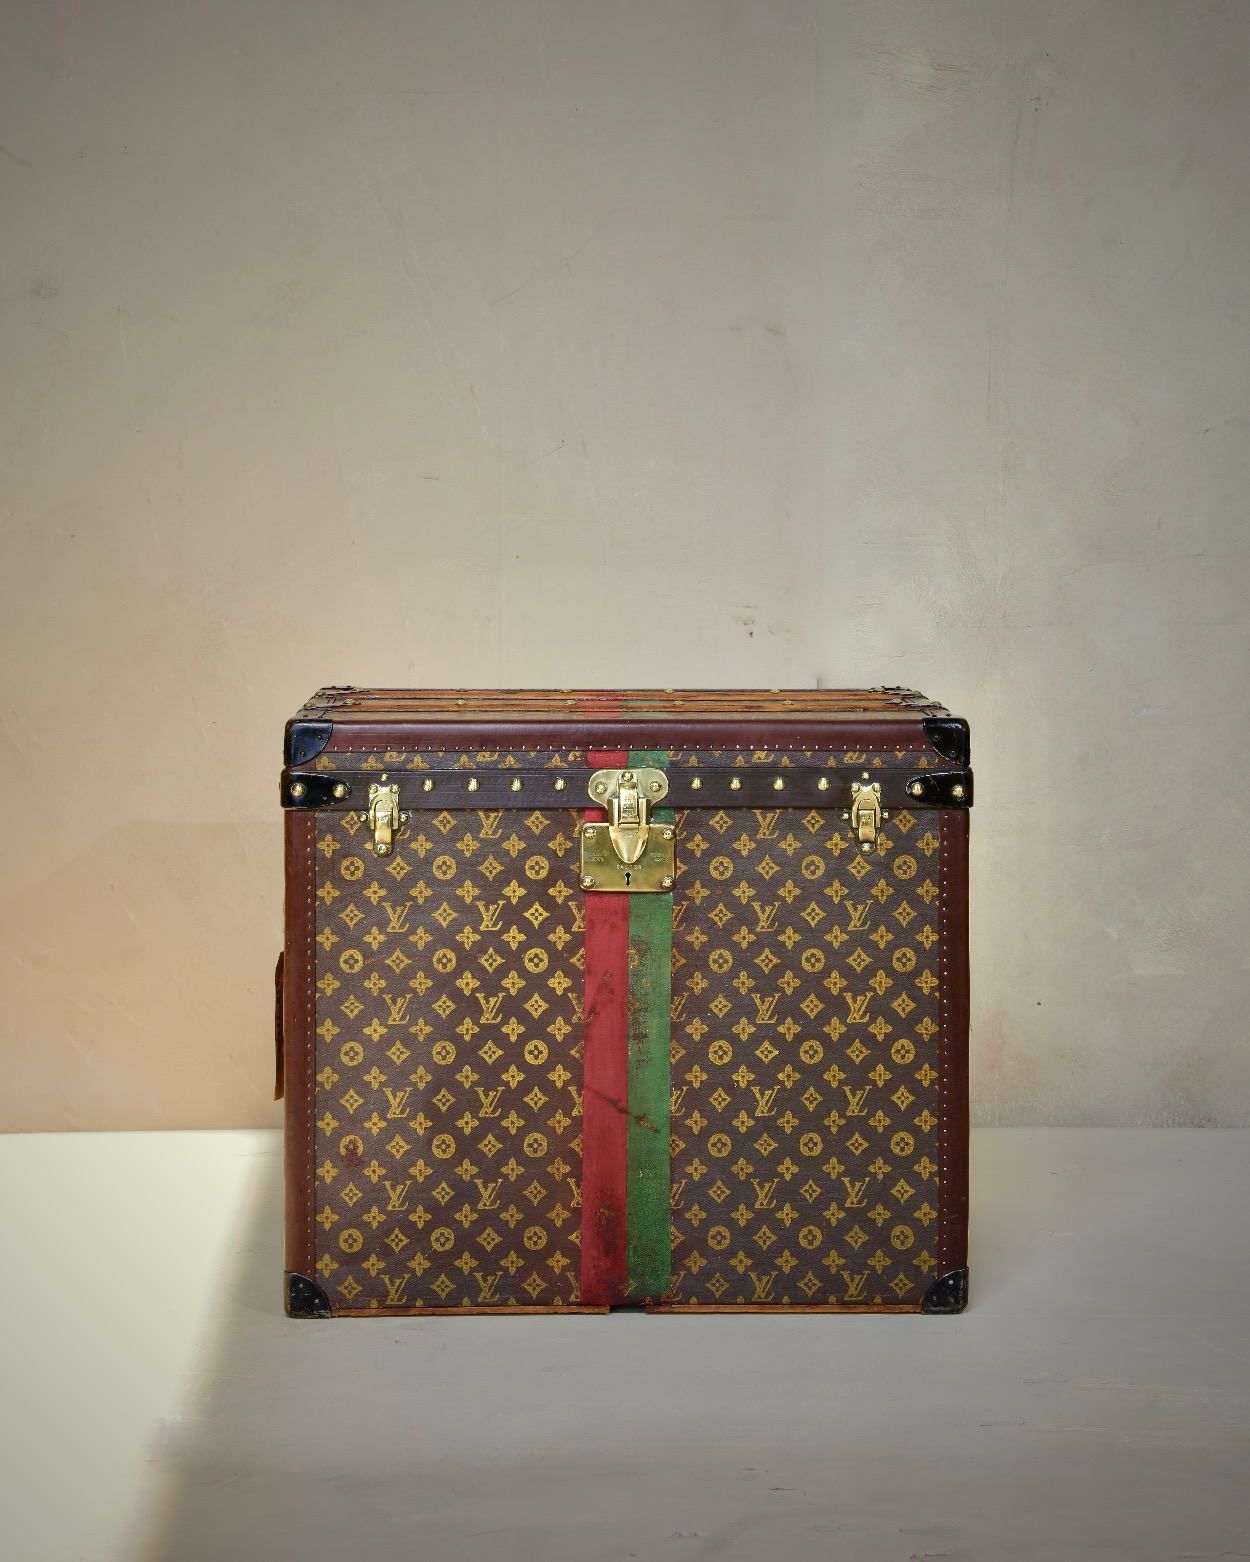 the-well-traveled-trunk-louis-vuitton-thumbnail-product-5783-1